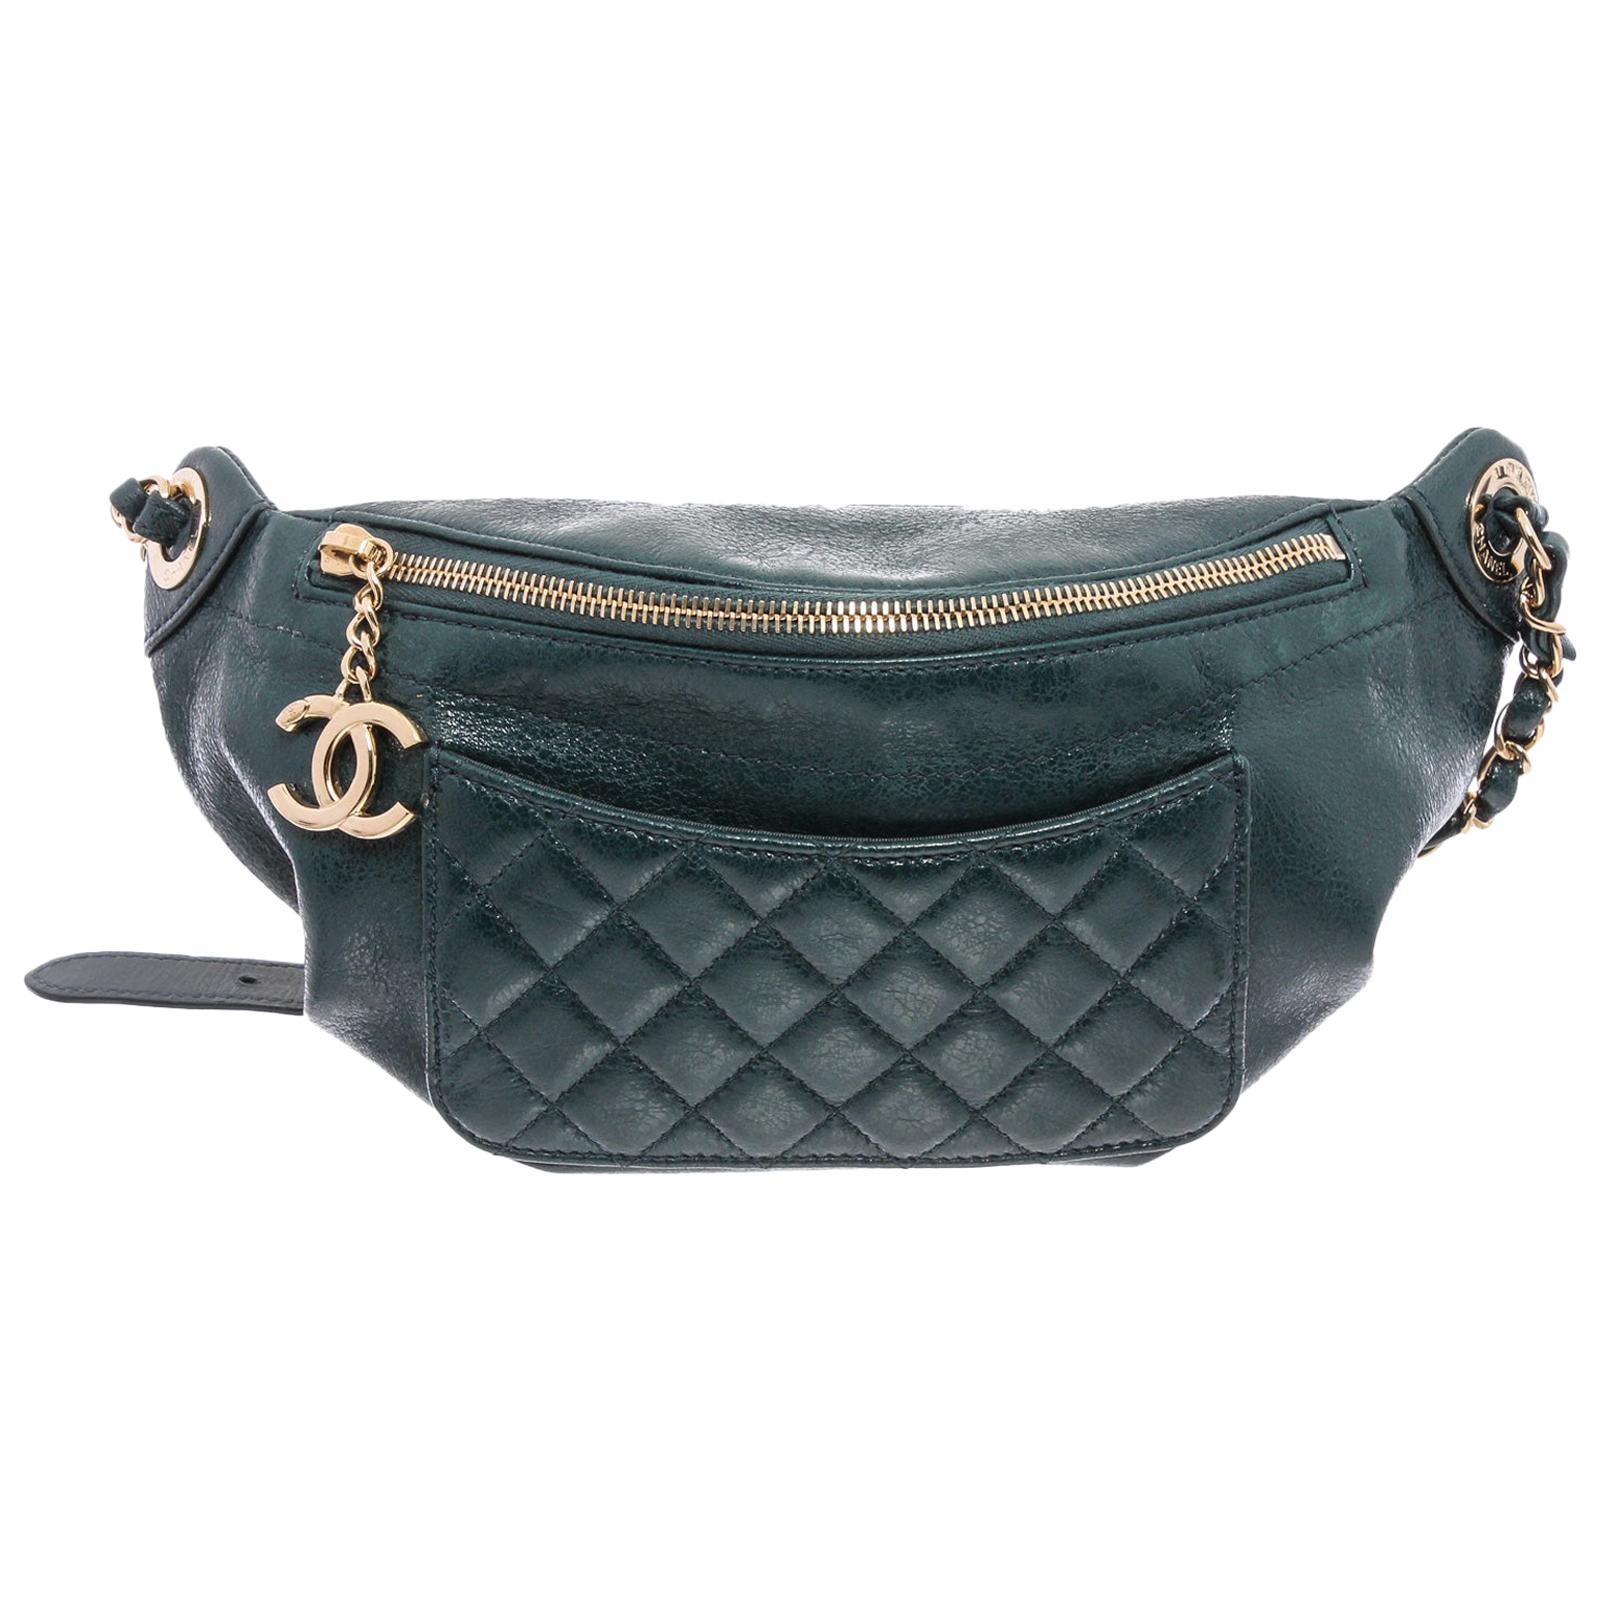 Chanel Black Quilted Leather Bi Classic Belt Bag Nm